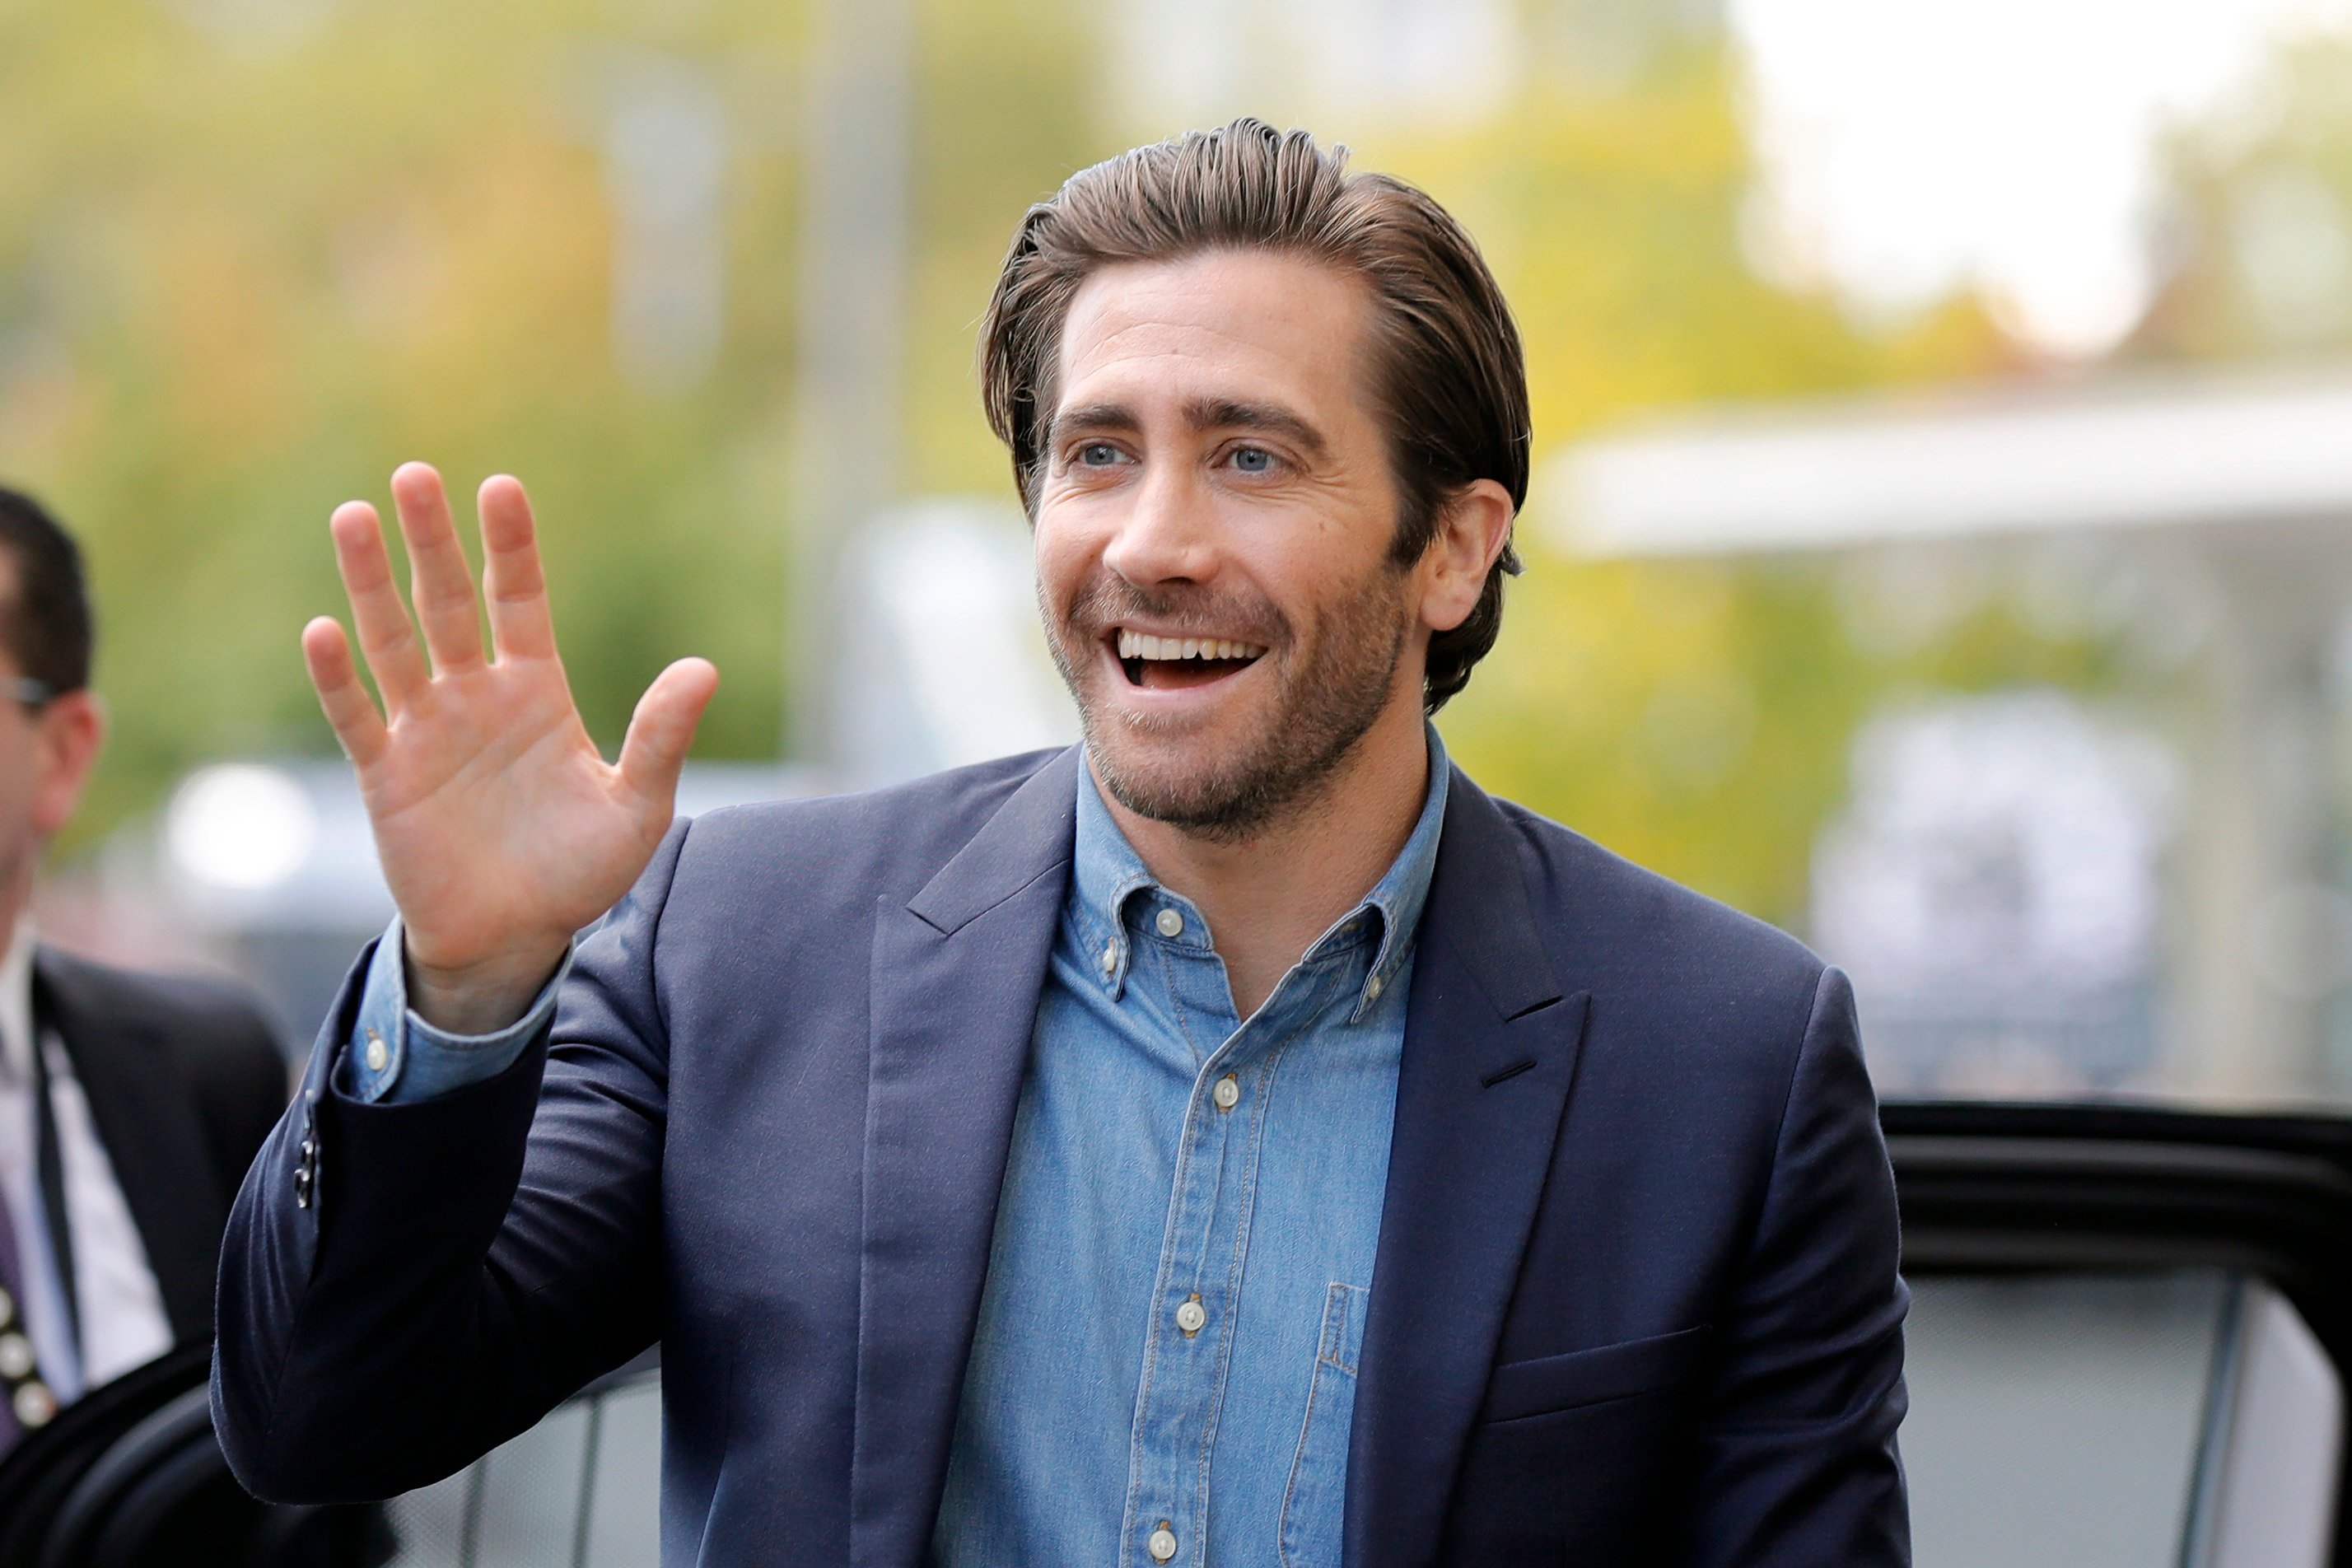 Jake Gyllenhaal Gained Respect for First Responders After Filming Upcoming Action Movie ‘Ambulance’